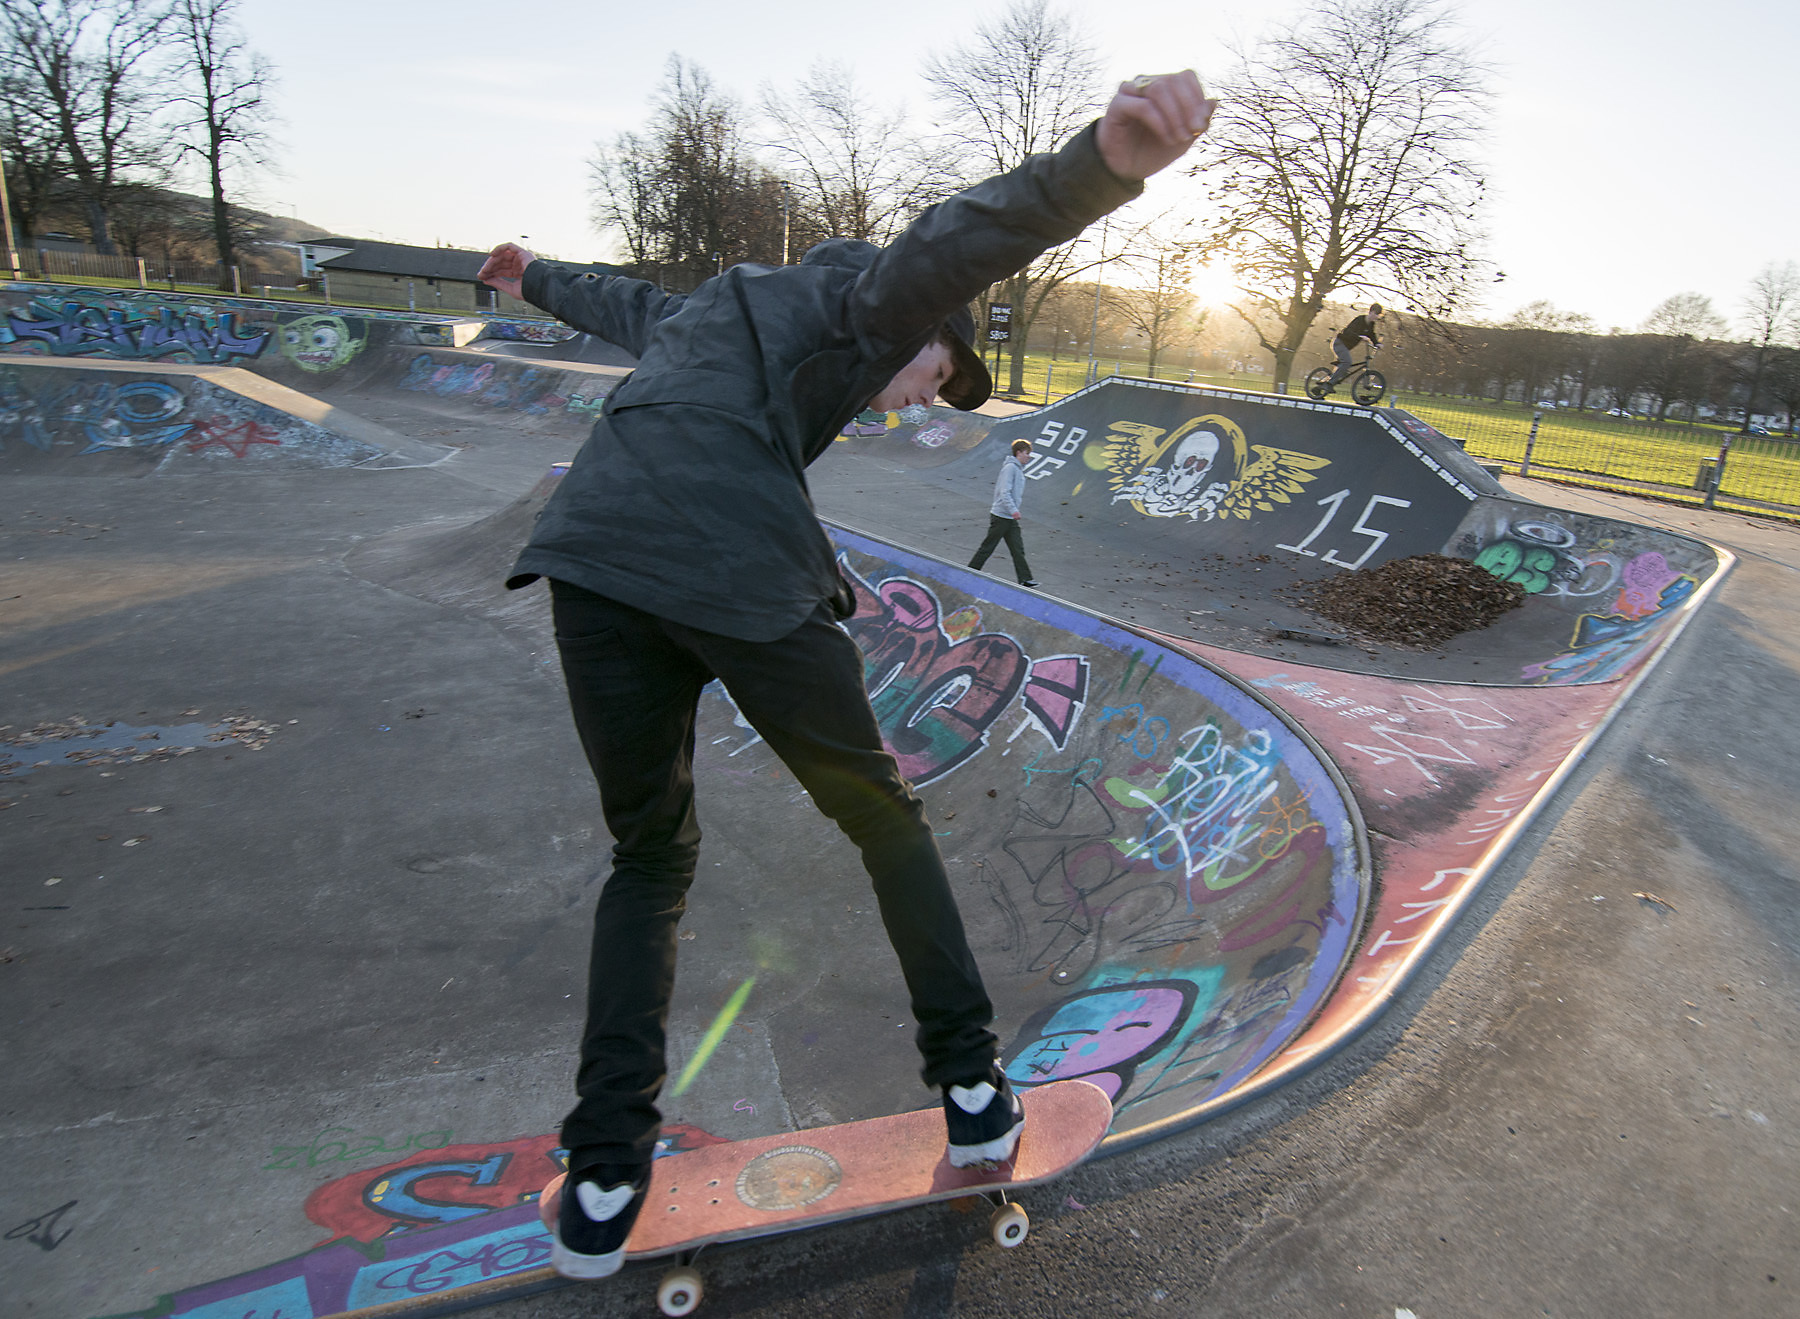 Youngsters pictured having fun at Perth Skatepark.